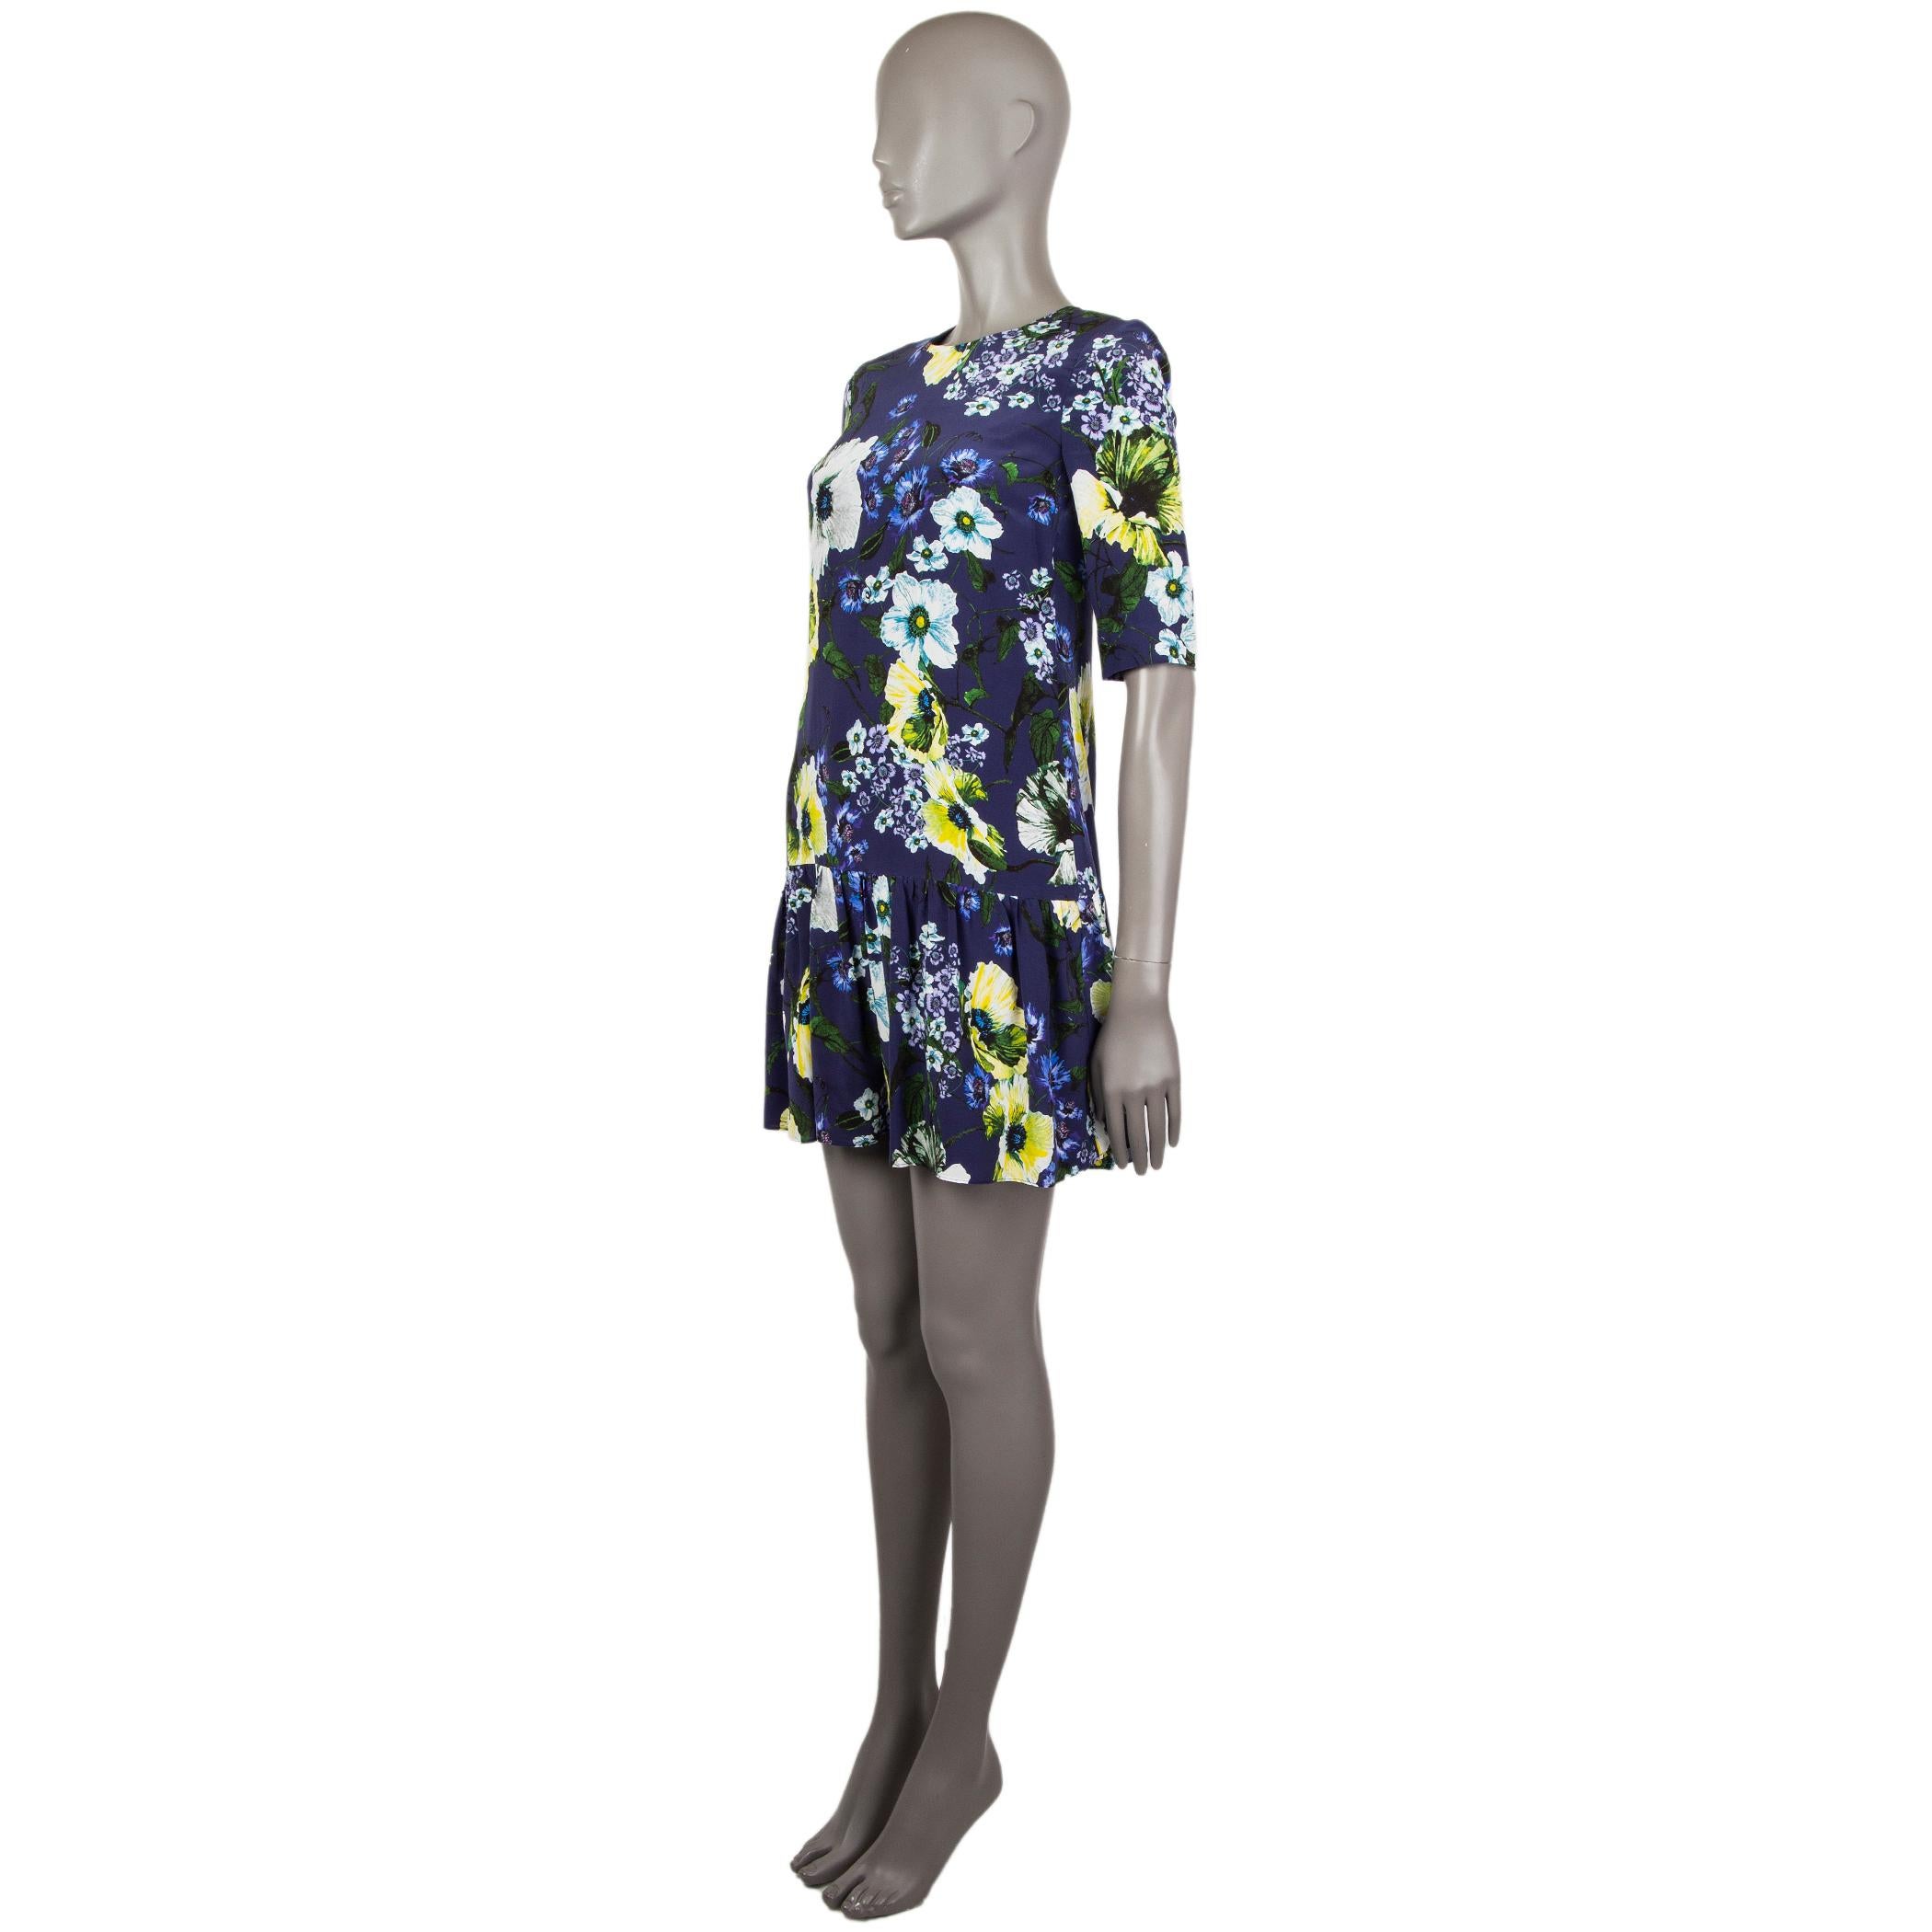 100% authentic Erdem 'Emmie' floral dress in indigo, green, white, yellow, and purple silk (100%). With crew neck, 3/4 sleeve, and gathered drop waist. Closes with hook and invisible zipper on the back. Lined in indigo silk (100%). Has been worn and